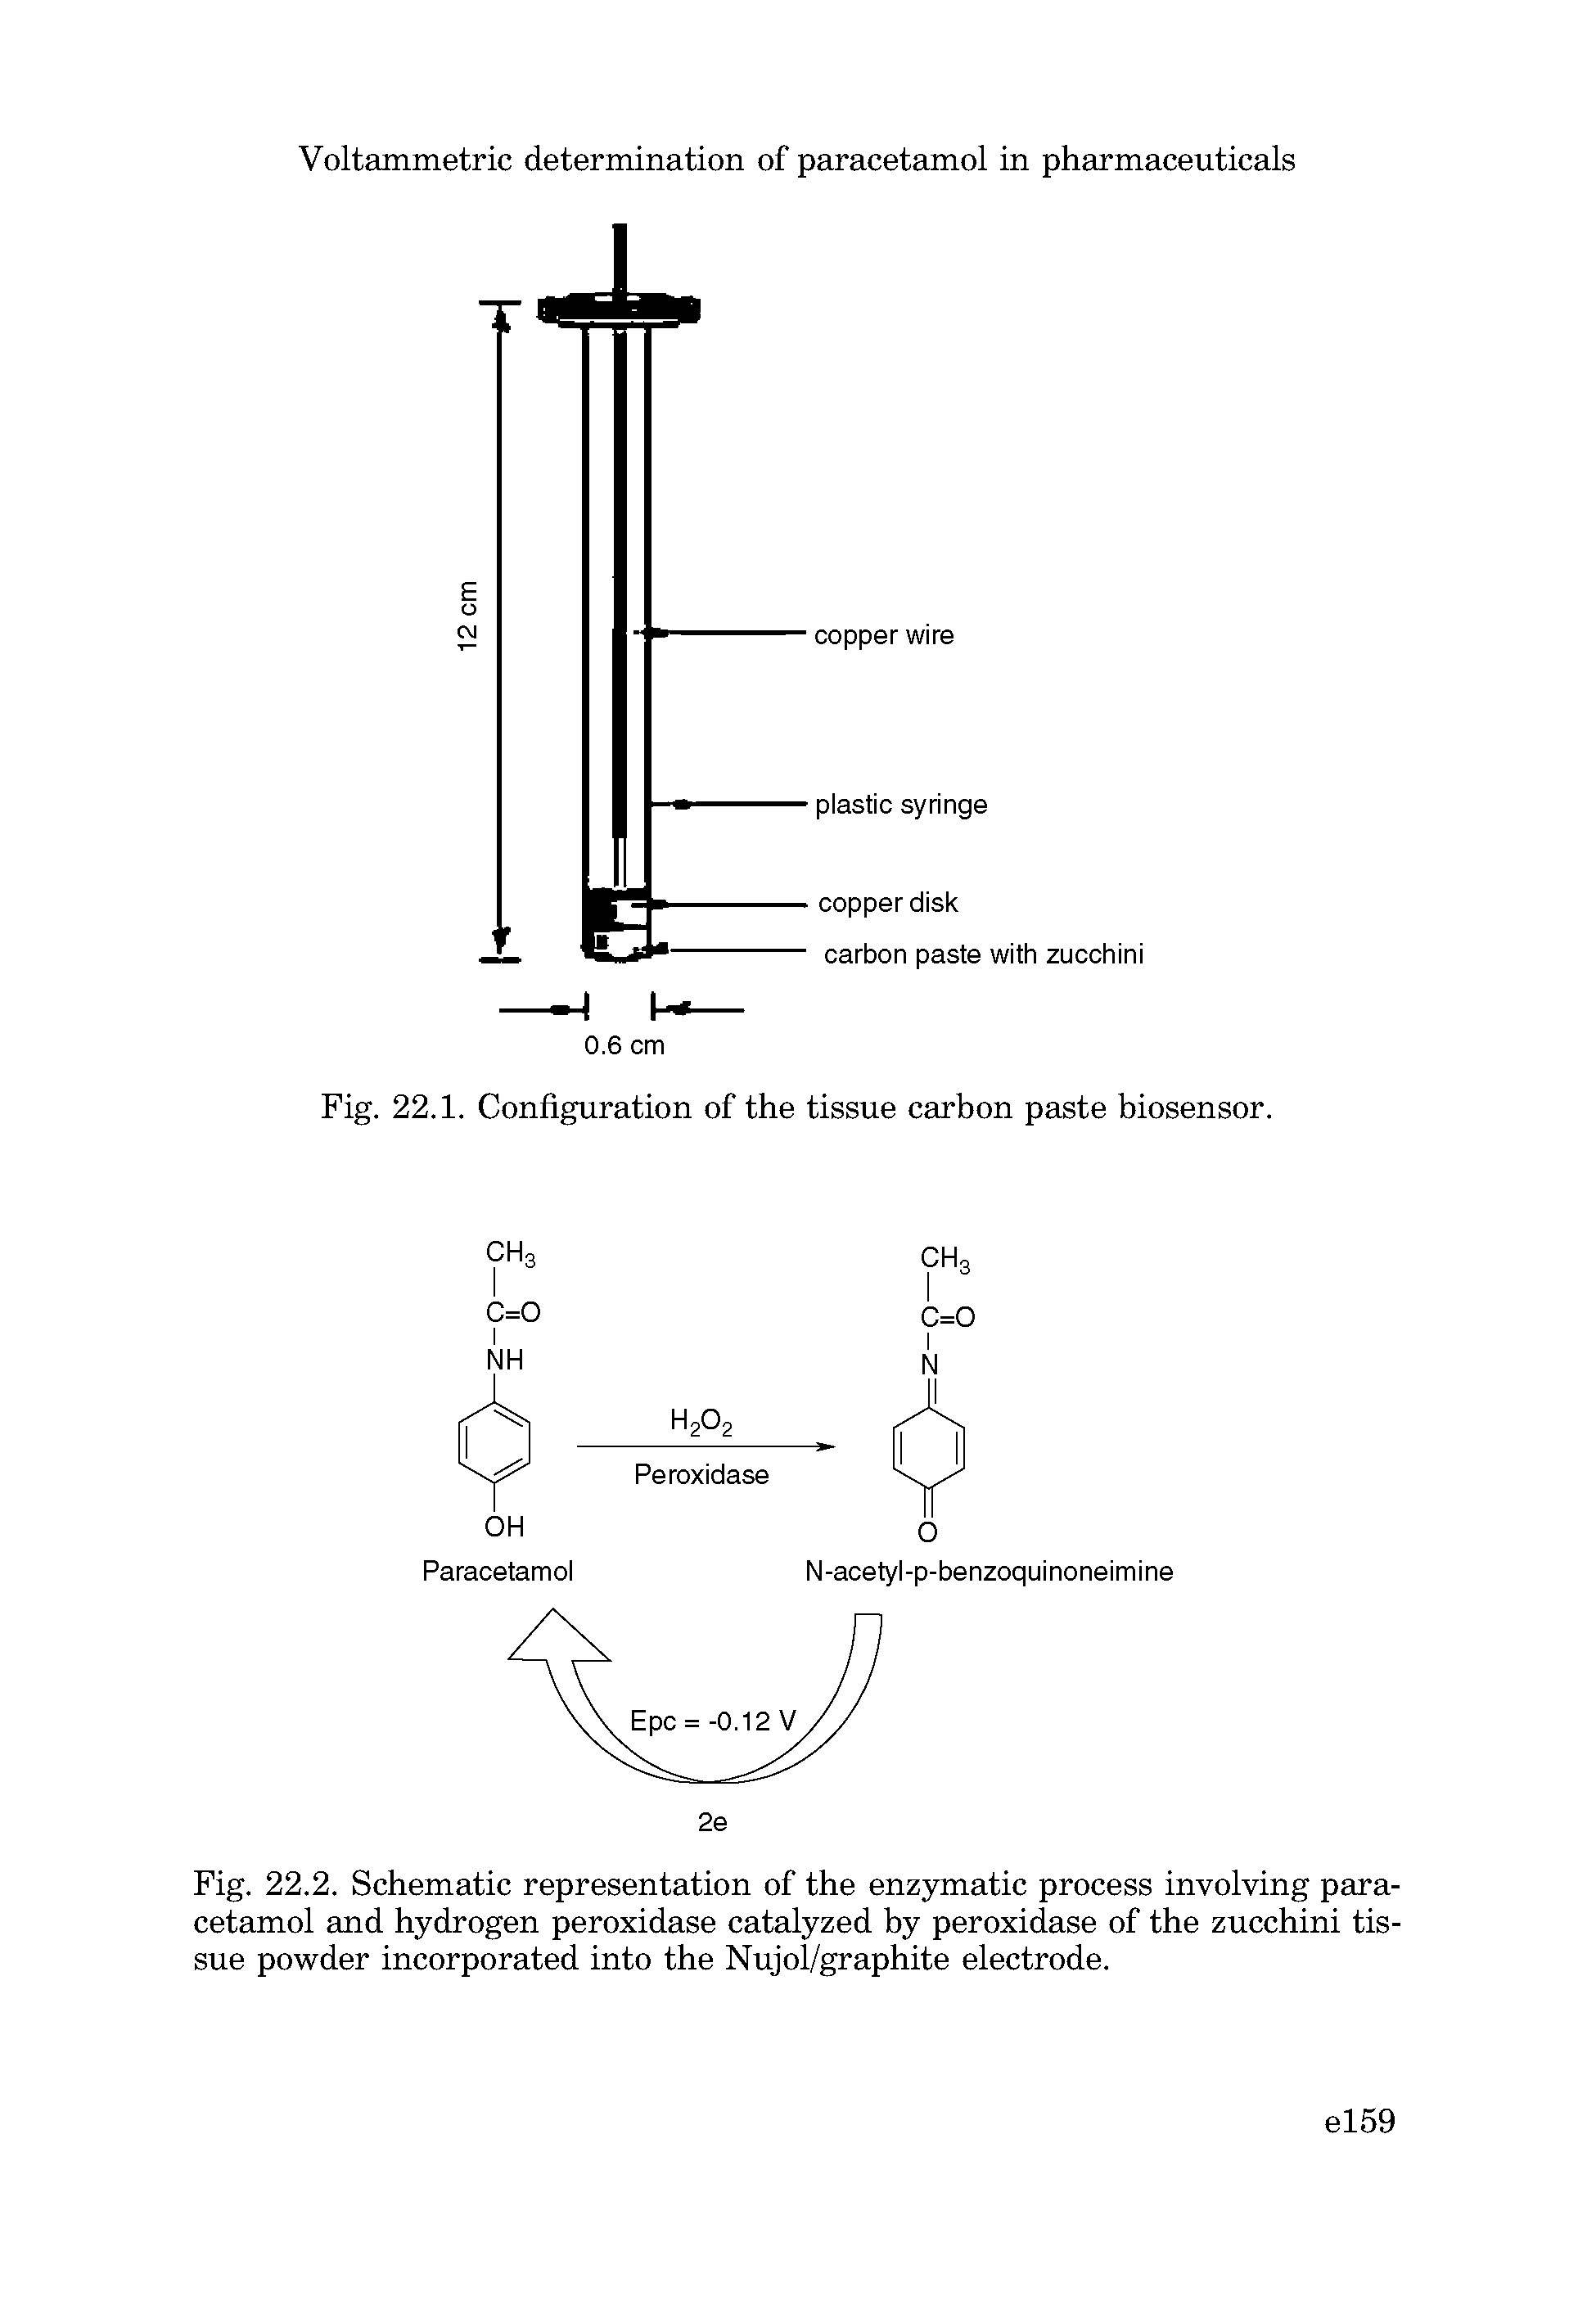 Fig. 22.2. Schematic representation of the enzymatic process involving paracetamol and hydrogen peroxidase catalyzed by peroxidase of the zucchini tissue powder incorporated into the Nujol/graphite electrode.